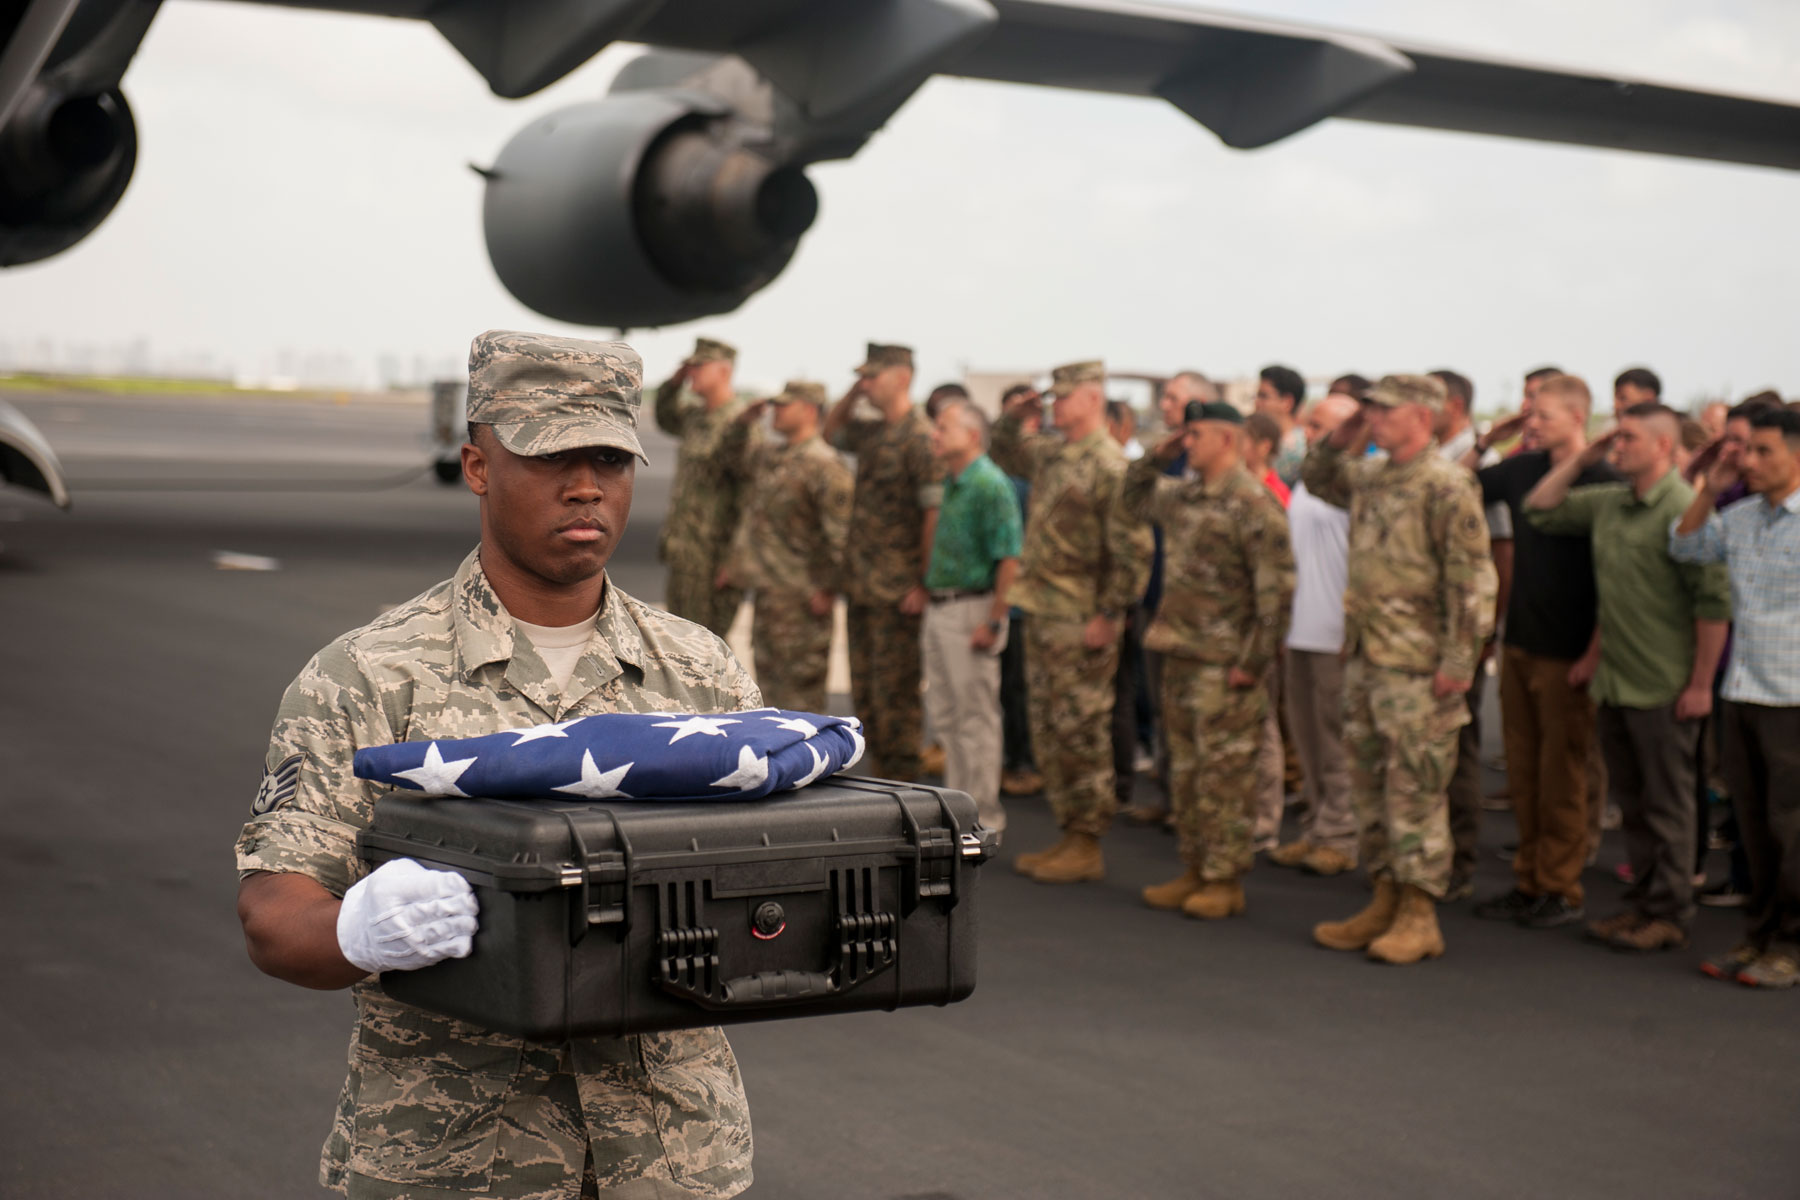 U.S. Air Force Staff Sgt. Sedric Franklin, an analyst with the Defense POW/MIA Accounting Agency (DPAA), carries a transfer case during a solemn movement at Joint Base Pearl Harbor-Hickam, Hawaii, April 15, 2018. (U.S. Air Force photo by Staff Sgt. Matthew J. Bruch)